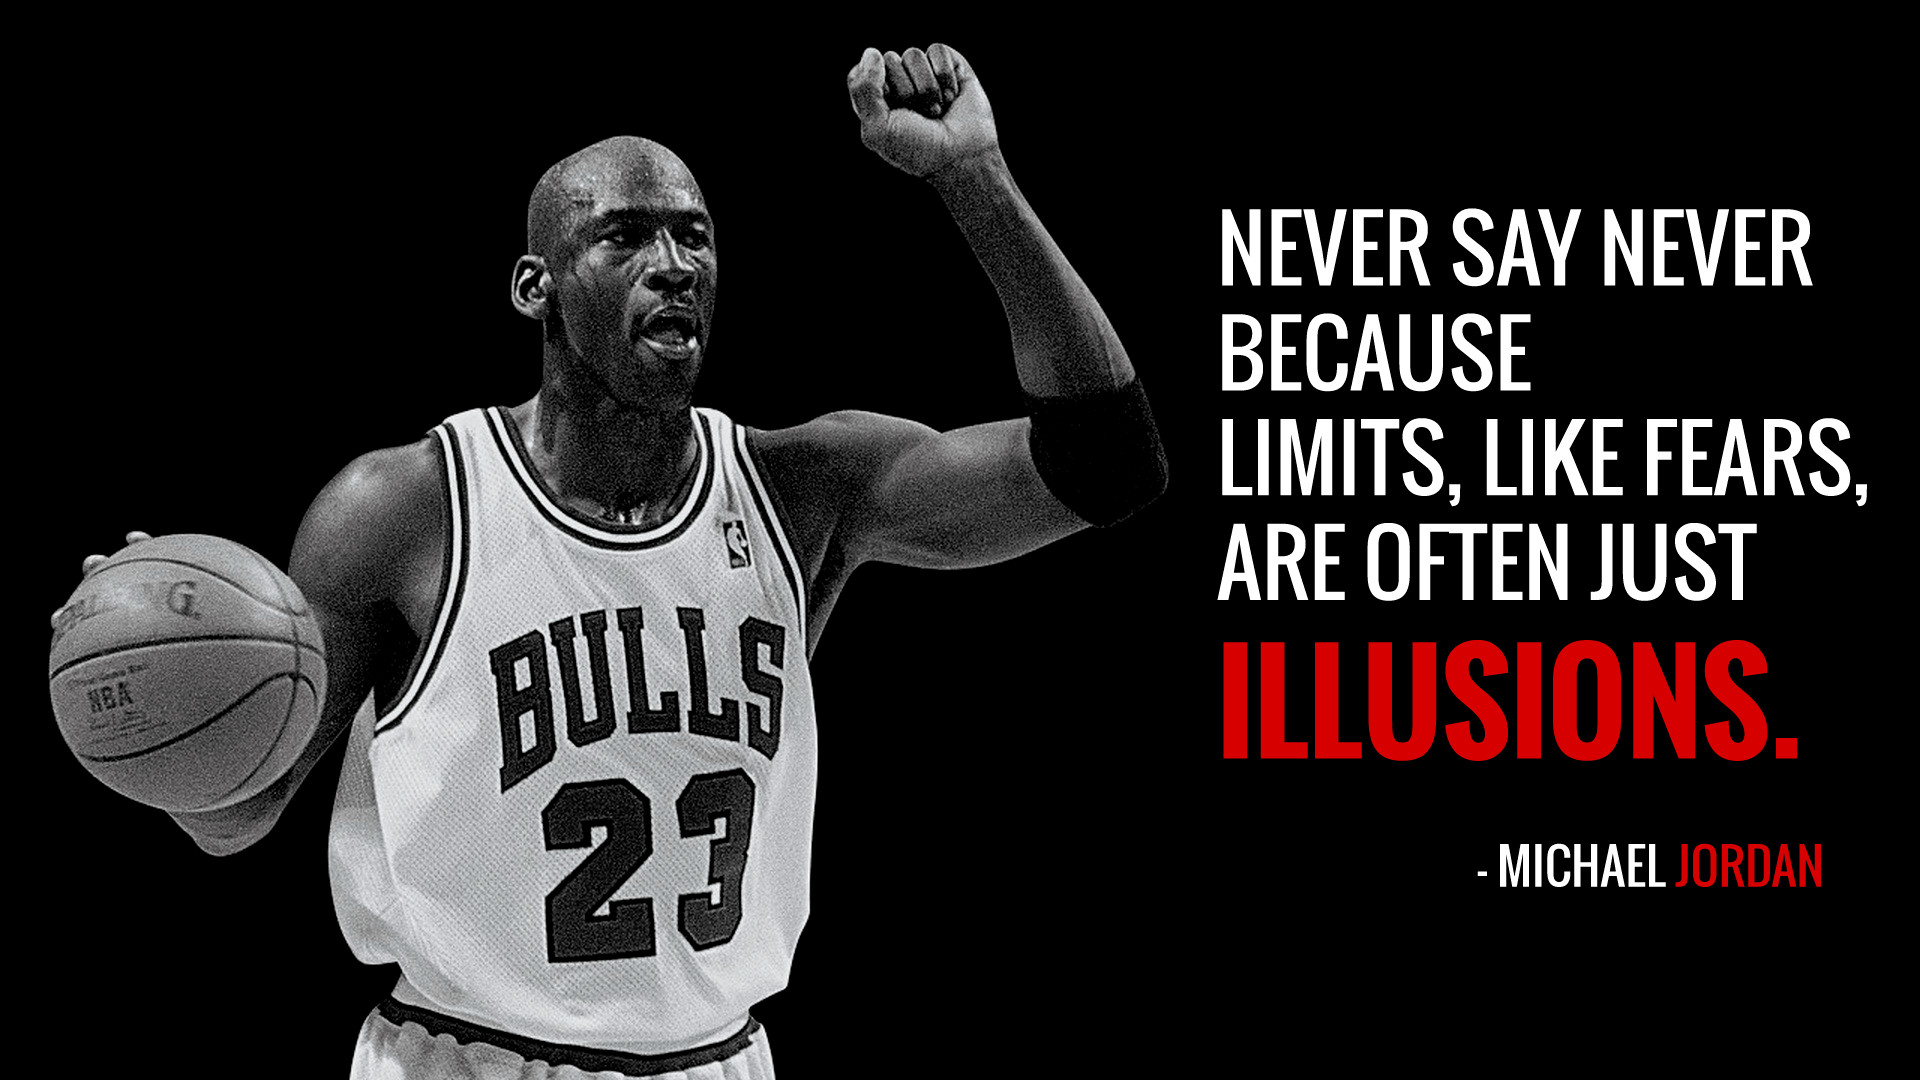 Athletics Inspirational Quotes
 25 All Time Best Inspirational Sports Quotes To Get You Going